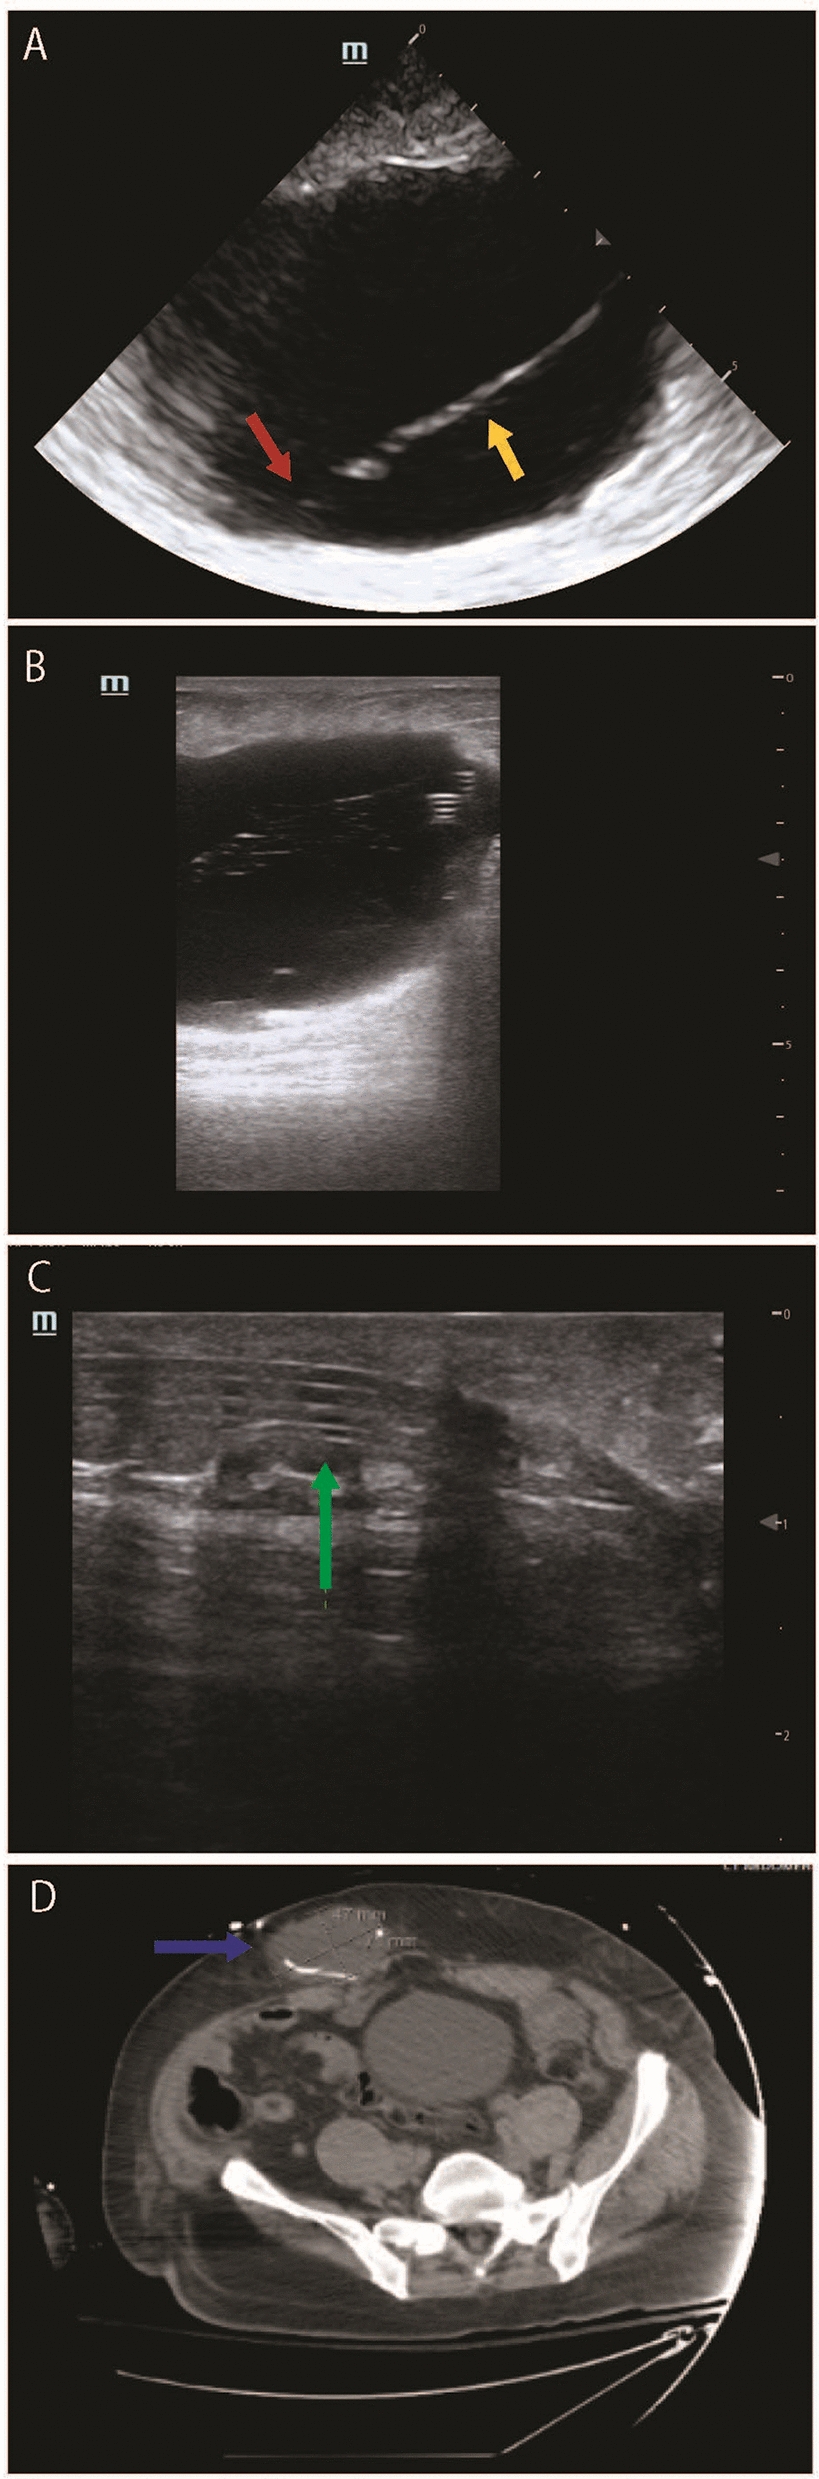 Point-of-Care Ultrasound to Rapidly Detect a Malpositioned Ventriculoperitoneal Shunt